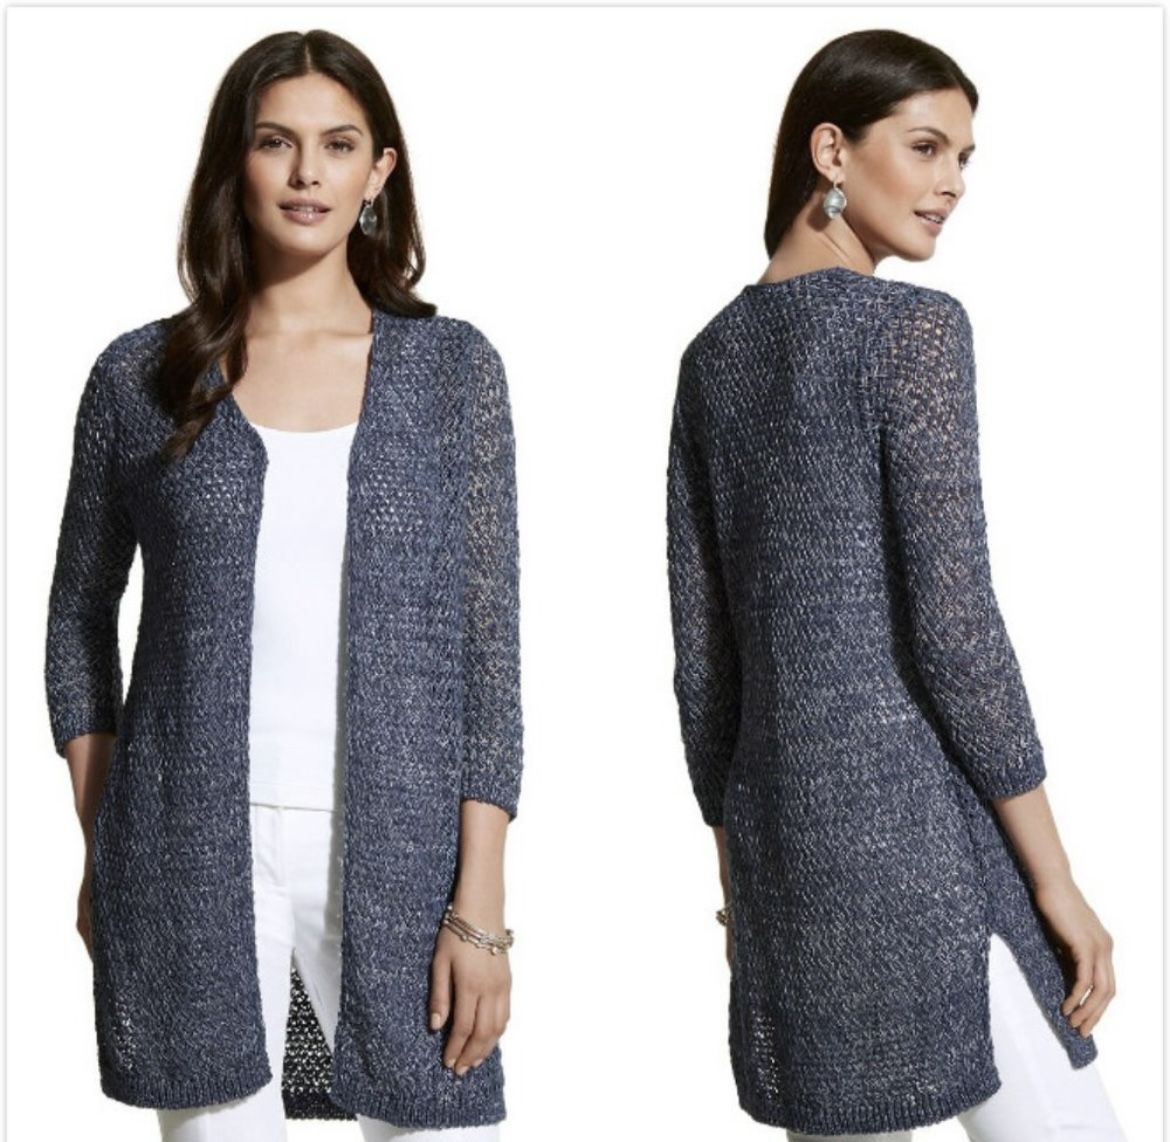 Brand New Chico’s Blue Halle Waffle Knit Cardigan - Size 8